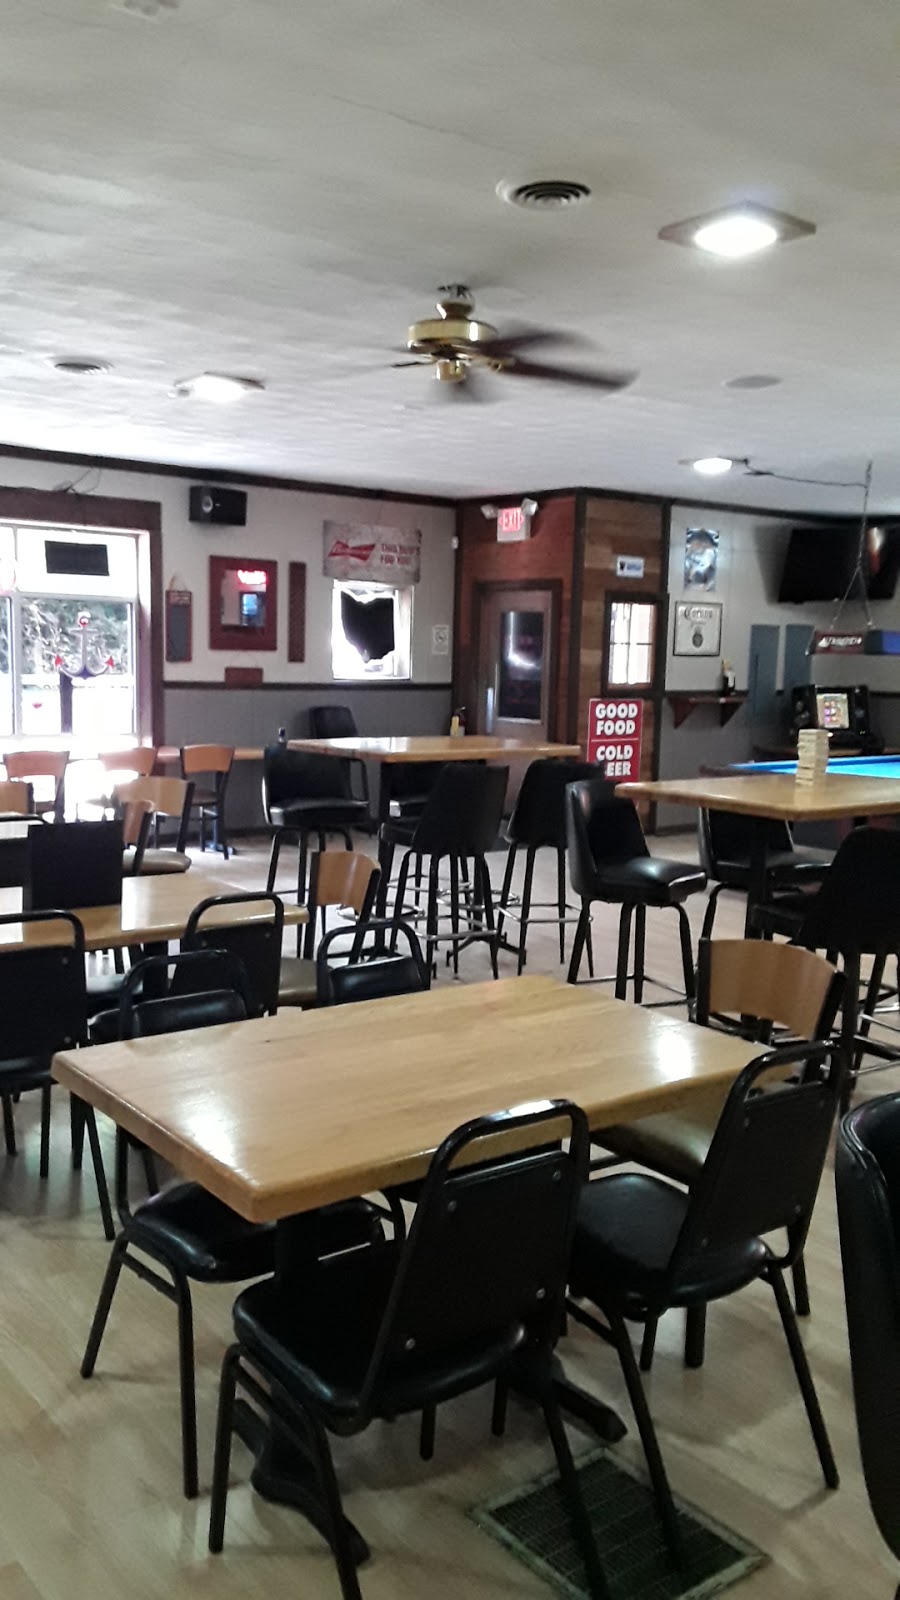 The River Edge Sports Bar & Grille | 9636 N Dixie Hwy, Franklin, OH 45005 | Phone: (937) 806-8209